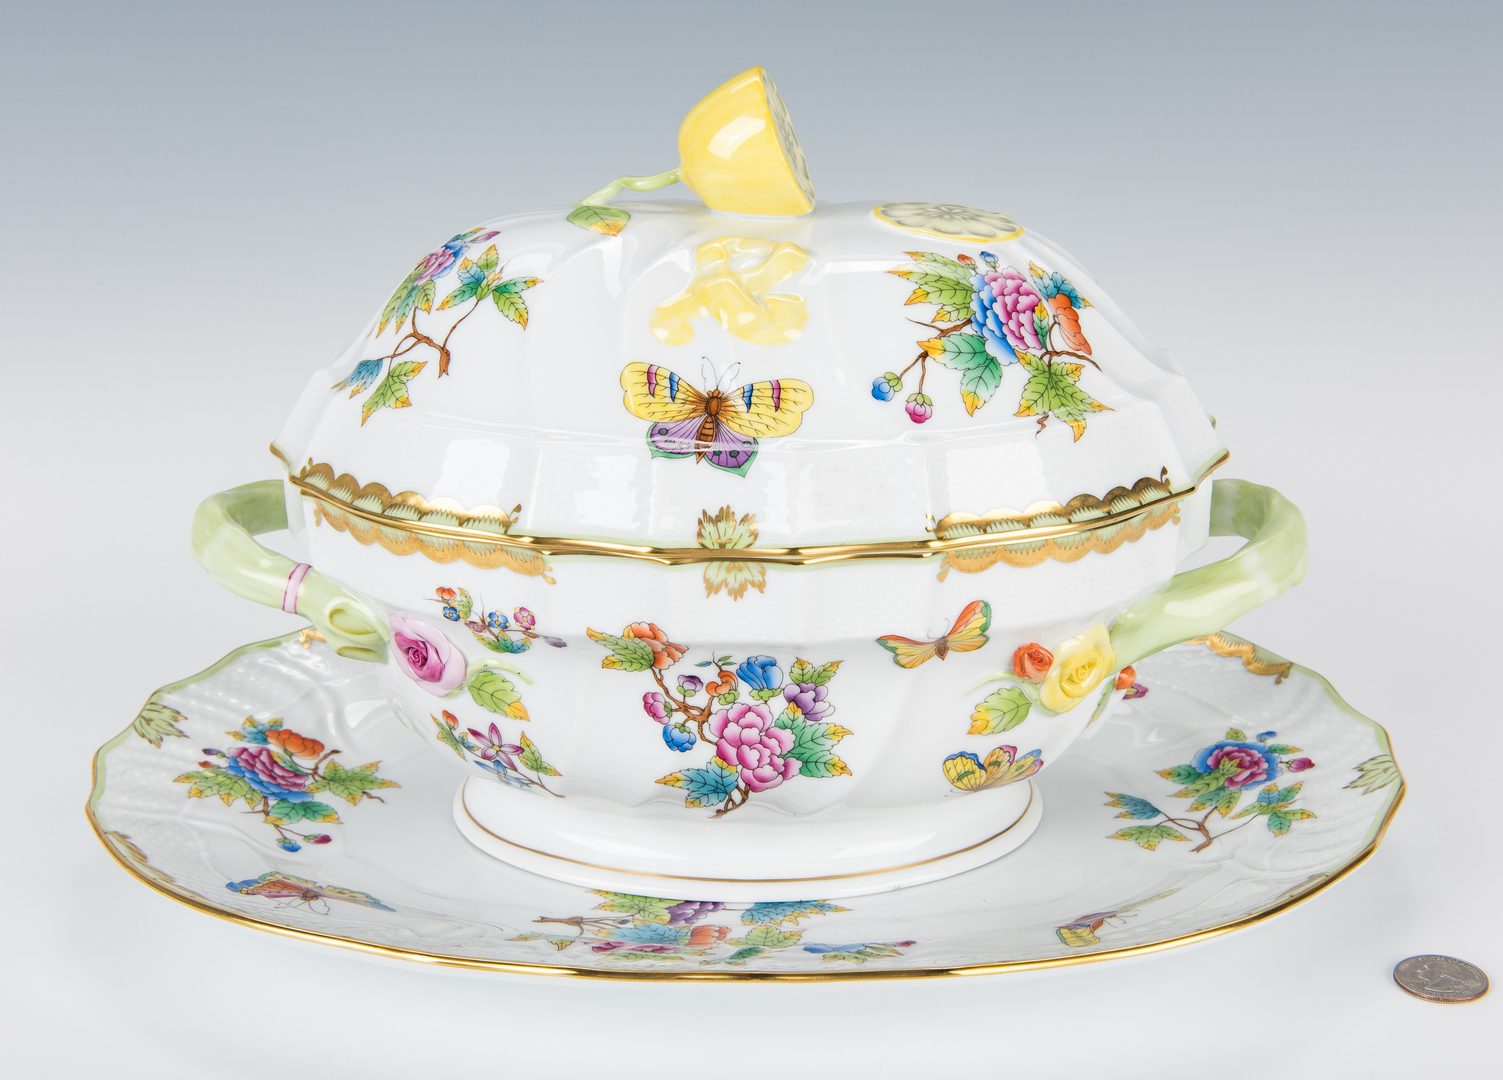 Lot 236: Herend Queen Victoria Soup Tureen and Underplate